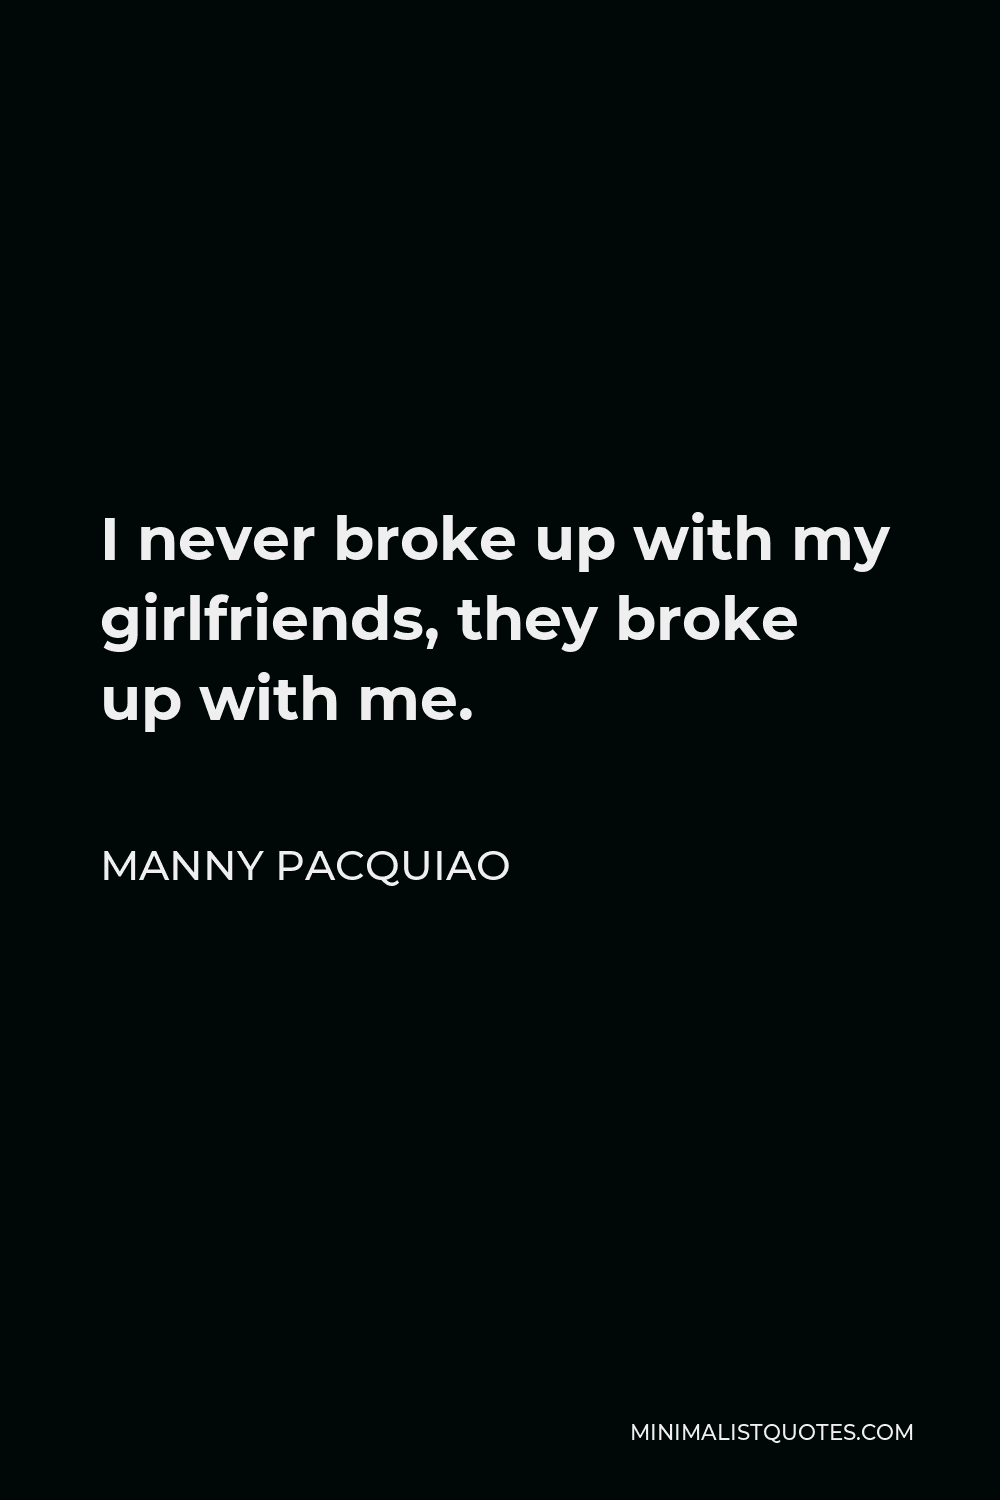 Manny Pacquiao Quote - I never broke up with my girlfriends, they broke up with me.